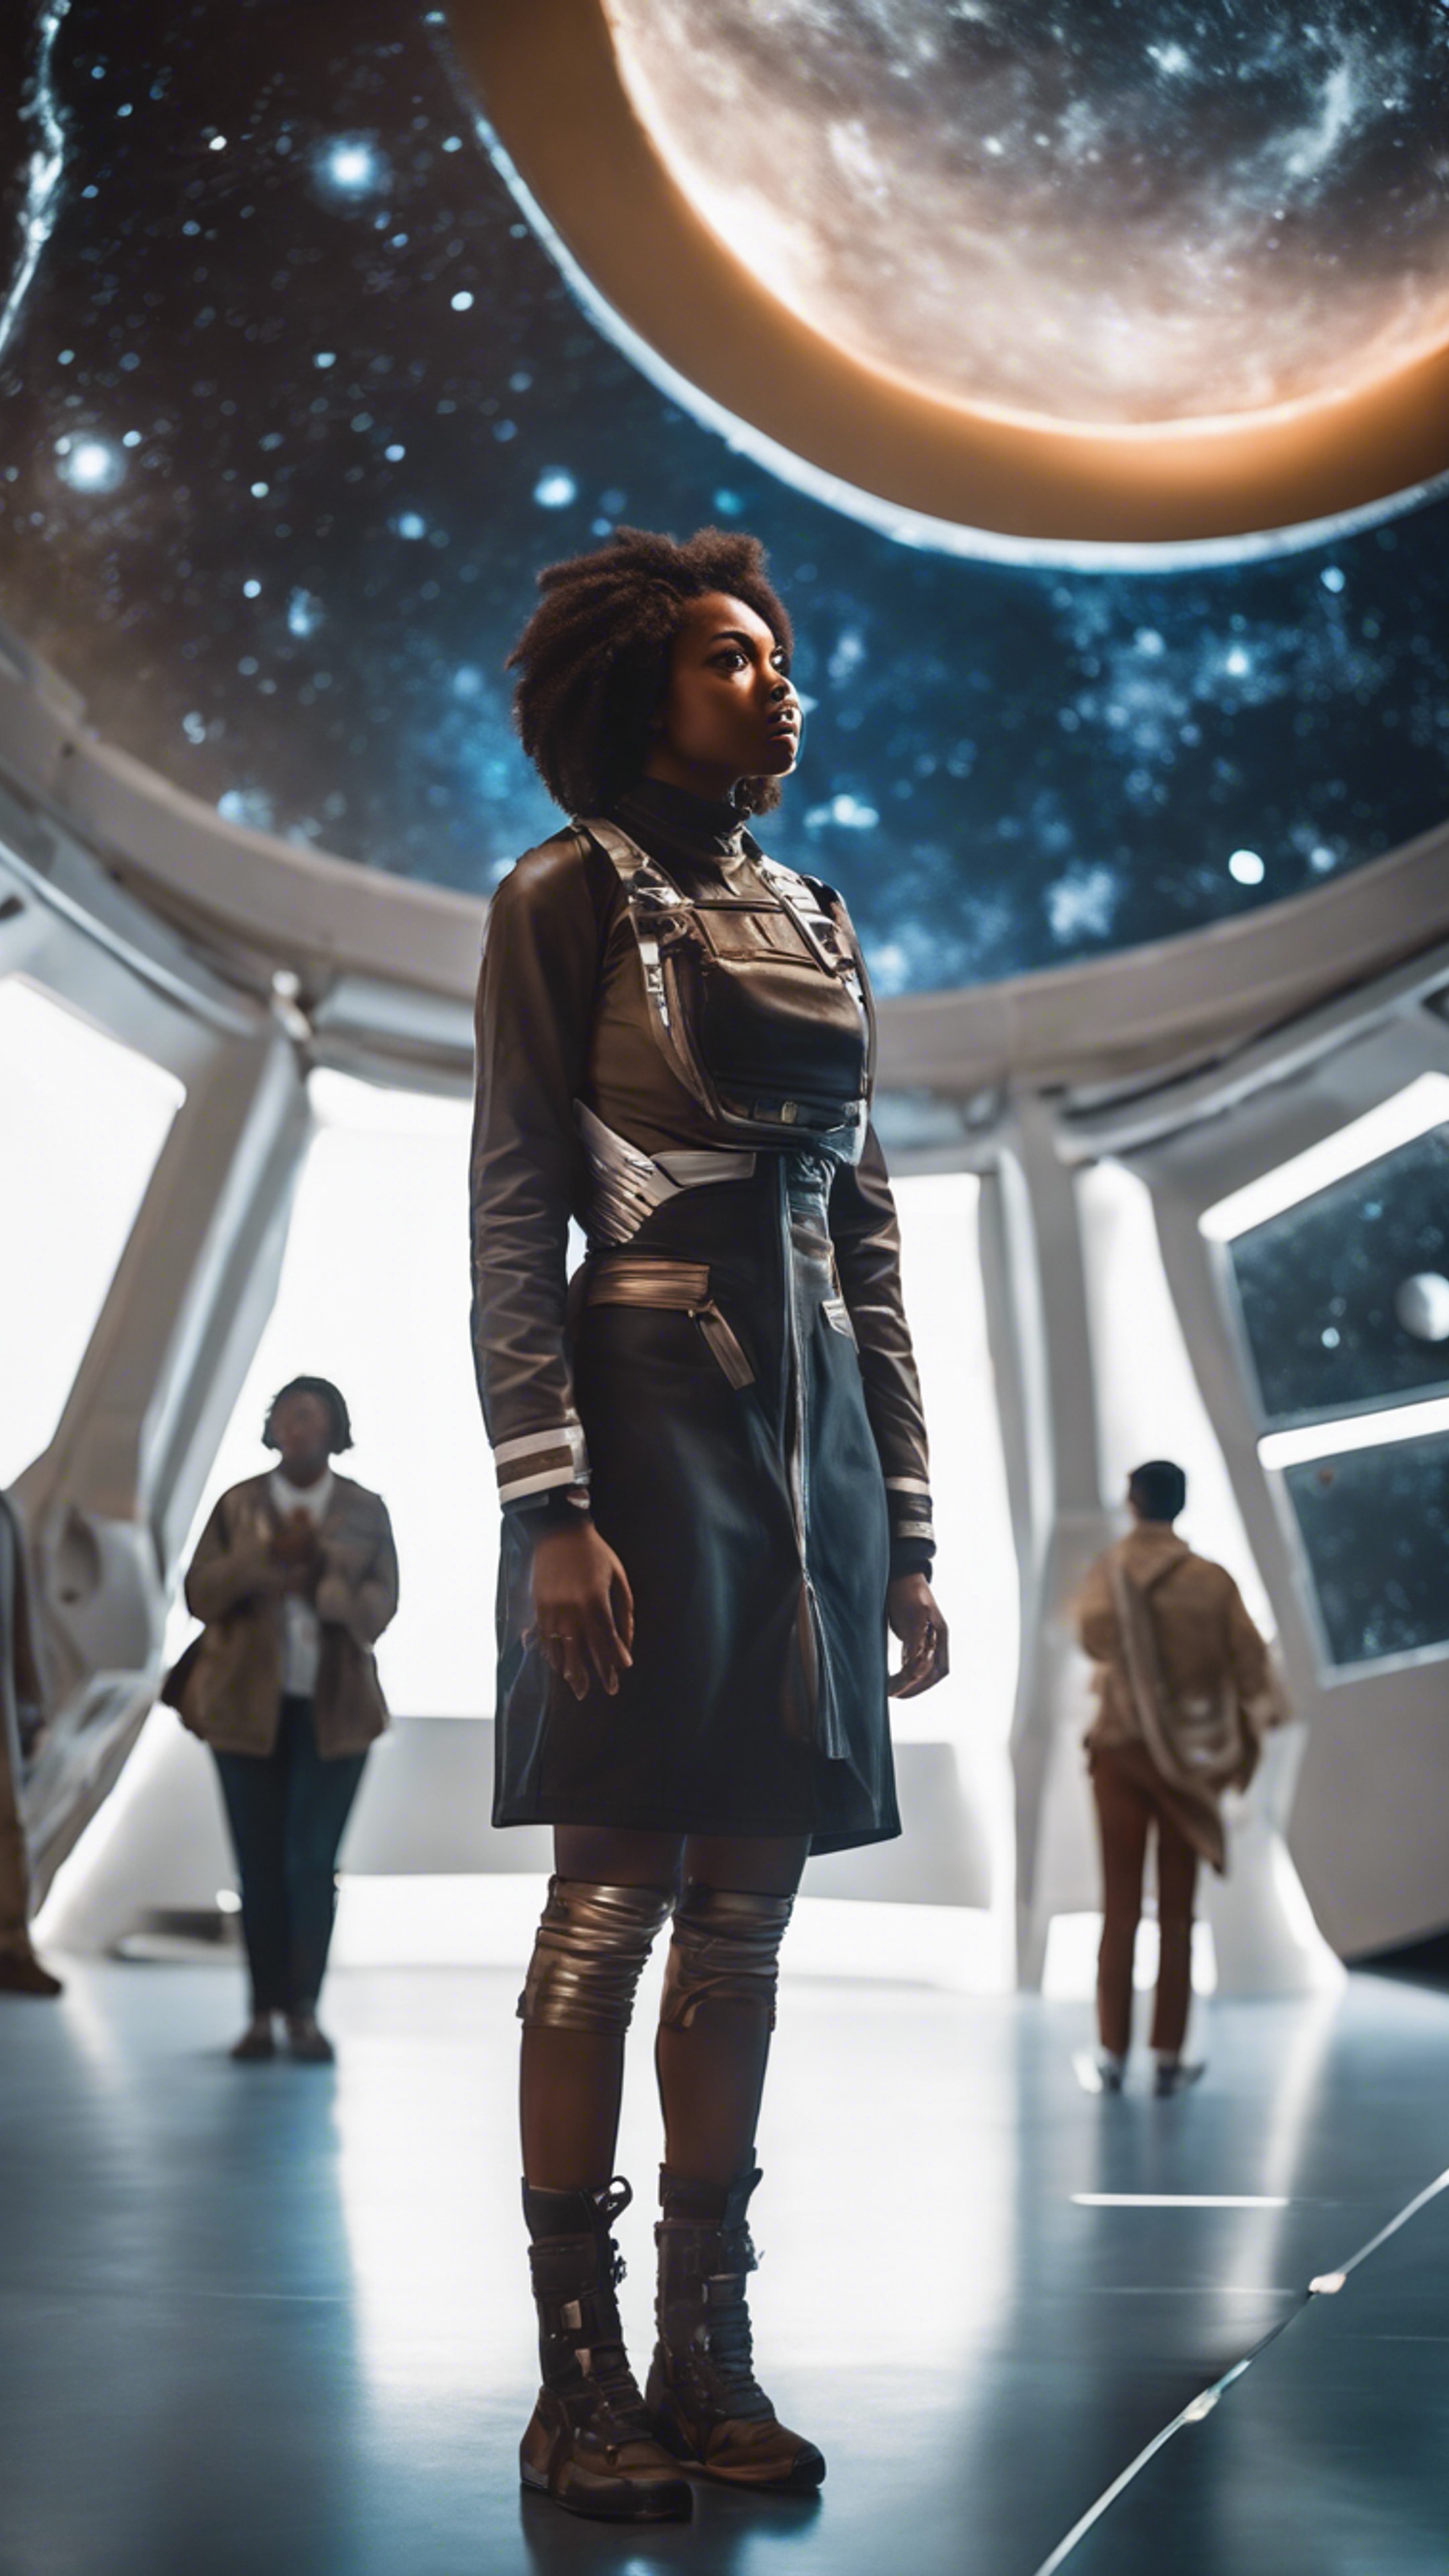 An ambitious black girl standing before a sleek spacecraft at a space museum, fascinated by the mysteries of the cosmos.壁紙[625b8f2cad91444c87e2]